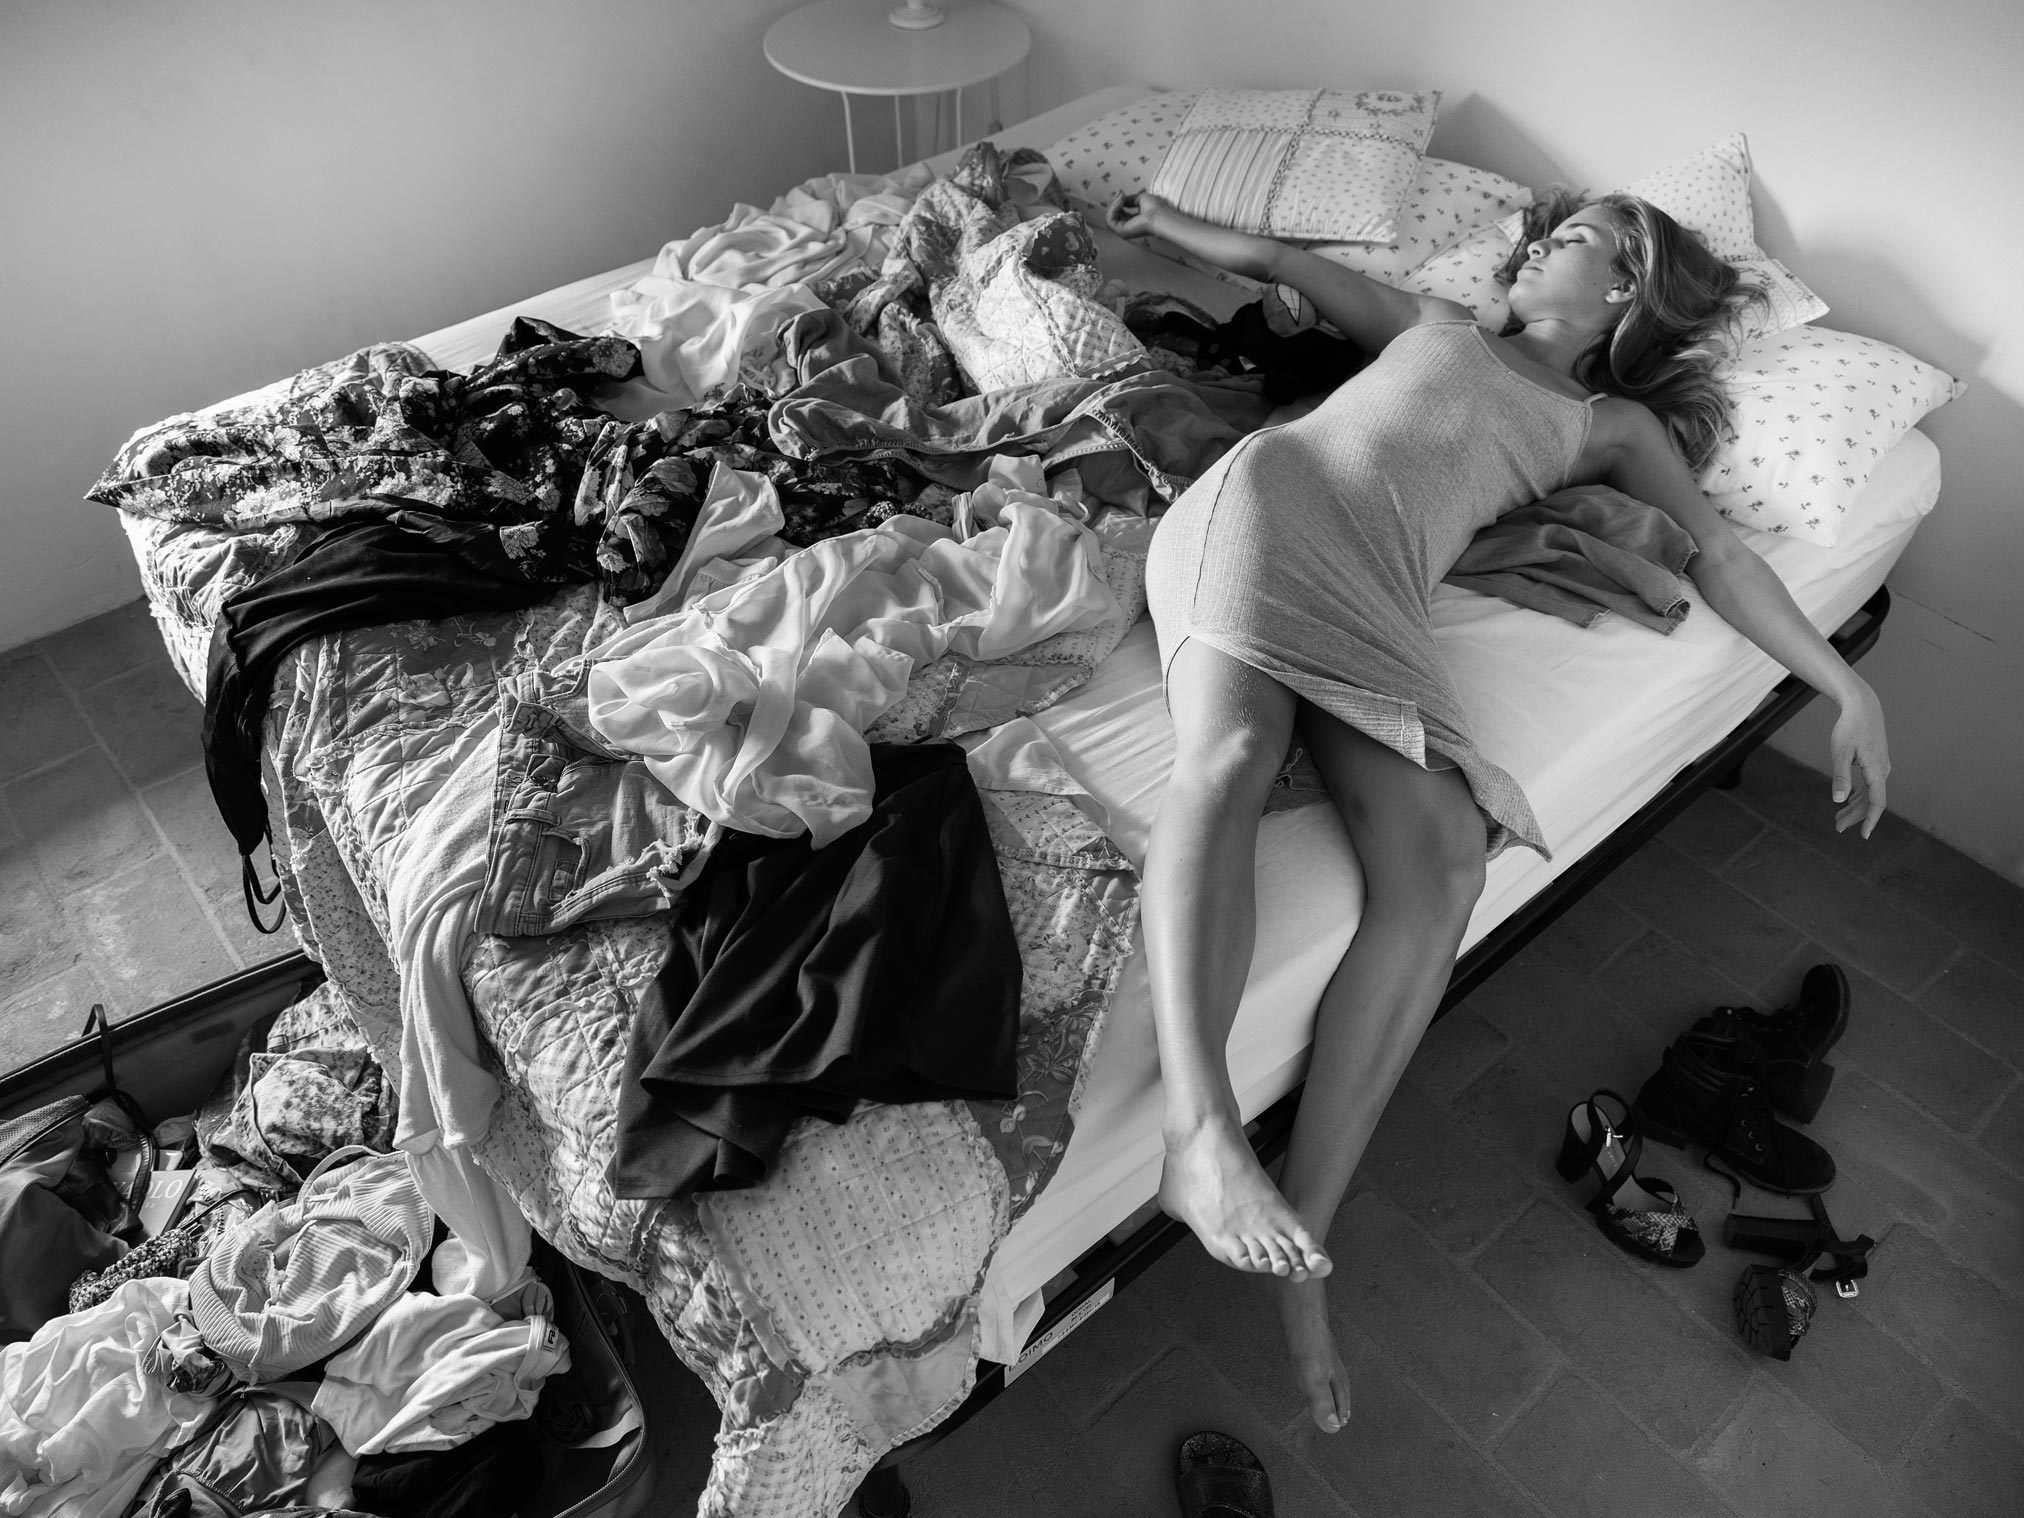 Terez Kočová is exhausted on the bed surrounded by her floordrobe after a hard three days of shooting with Damien Lovegrove.